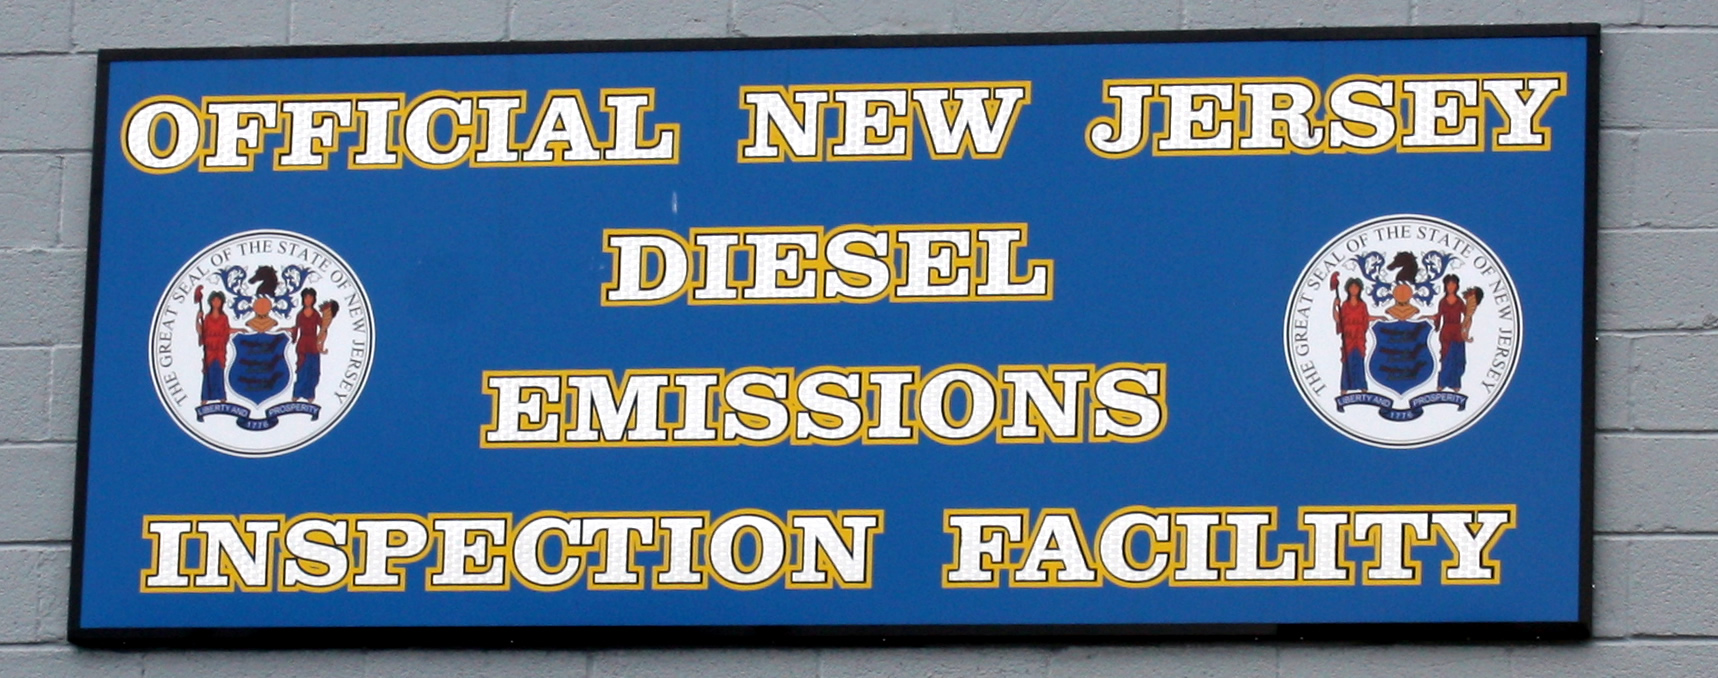 New Jersey Diesel Emissions inspection facility